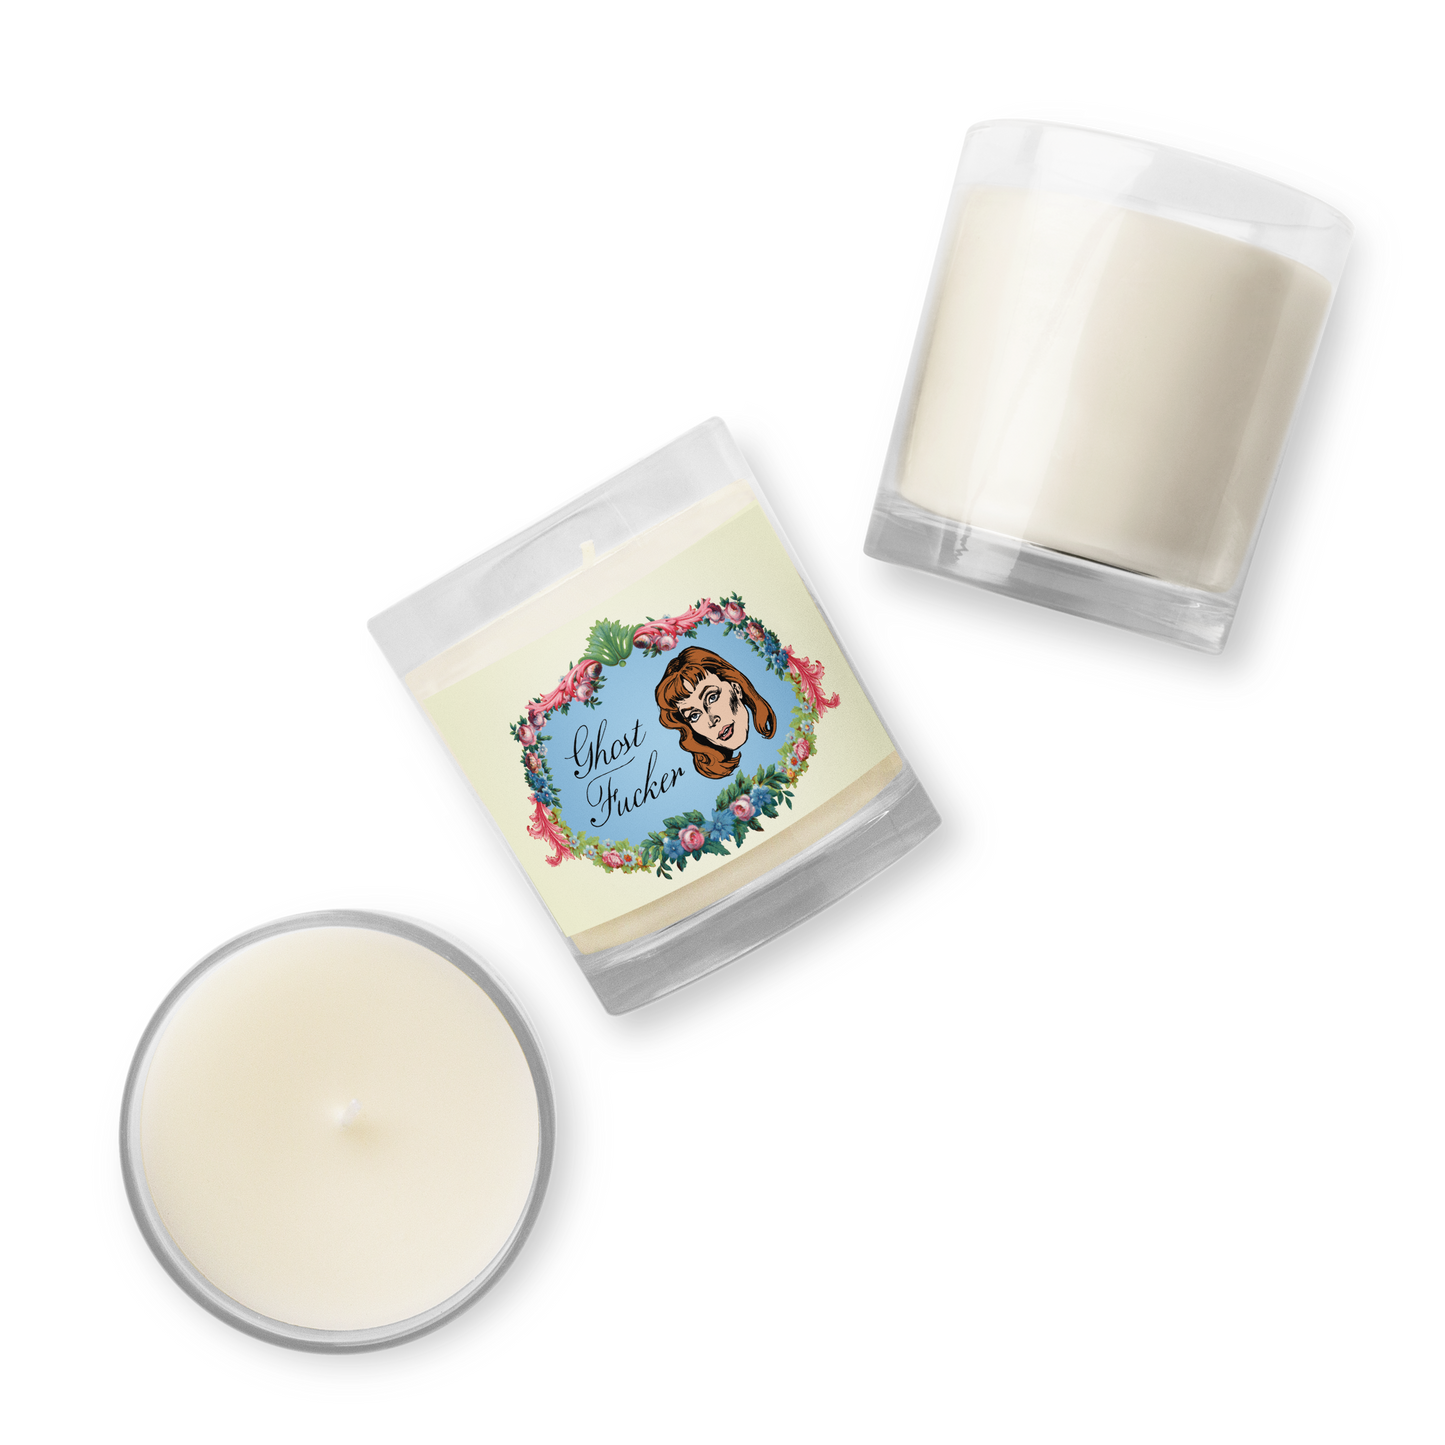 The Ghost Fucker Candle